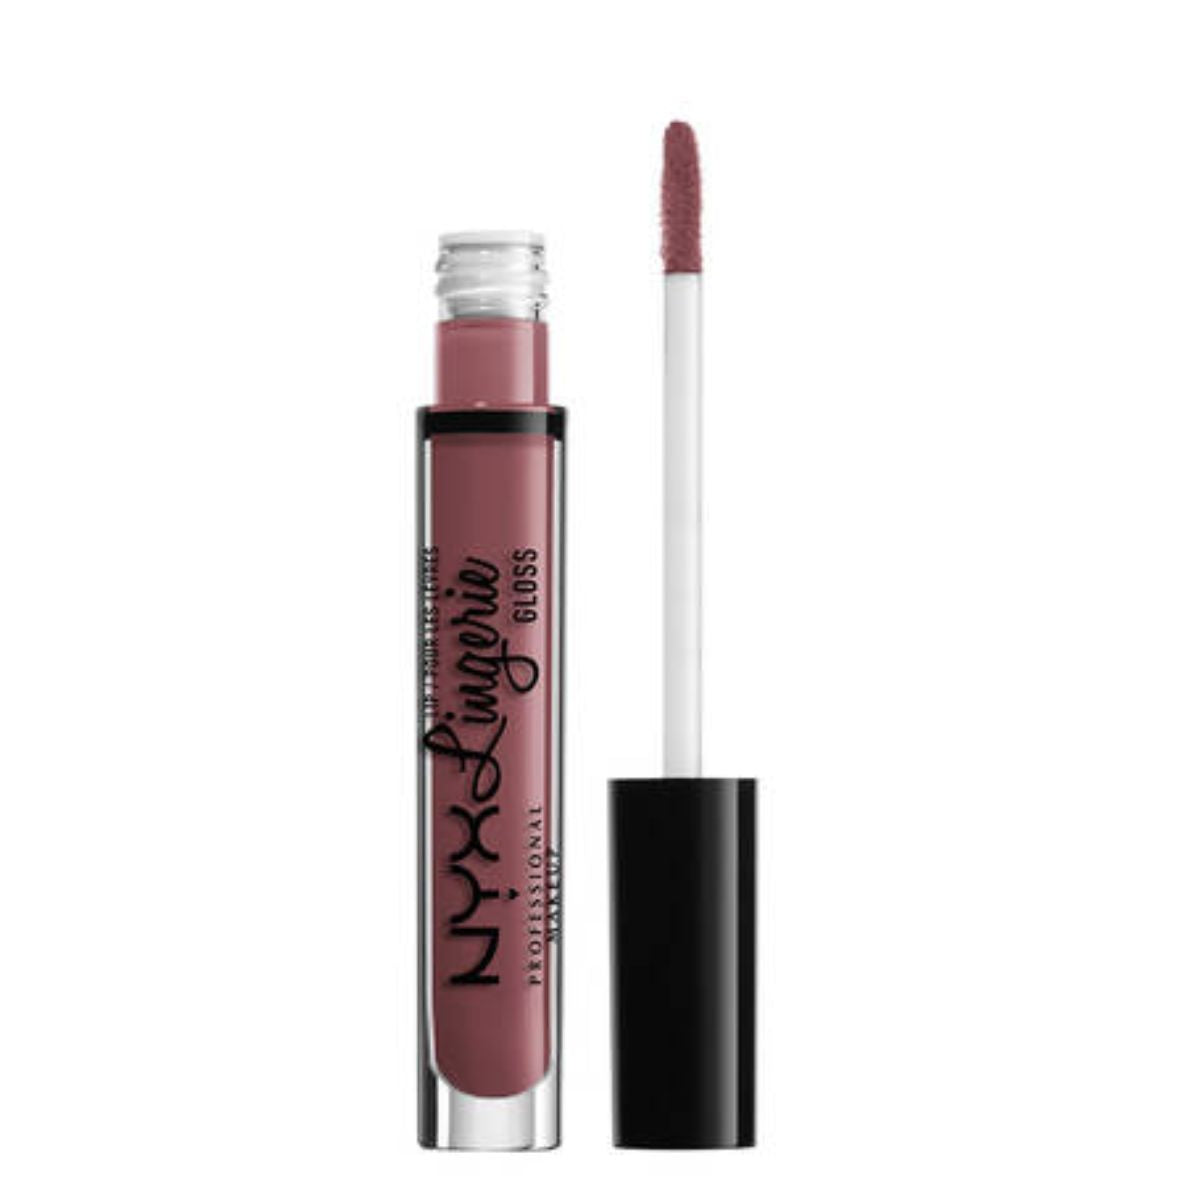 LIP LINGERIE GLOSS - OUTLET NYX PROFESSIONAL MAKEUP